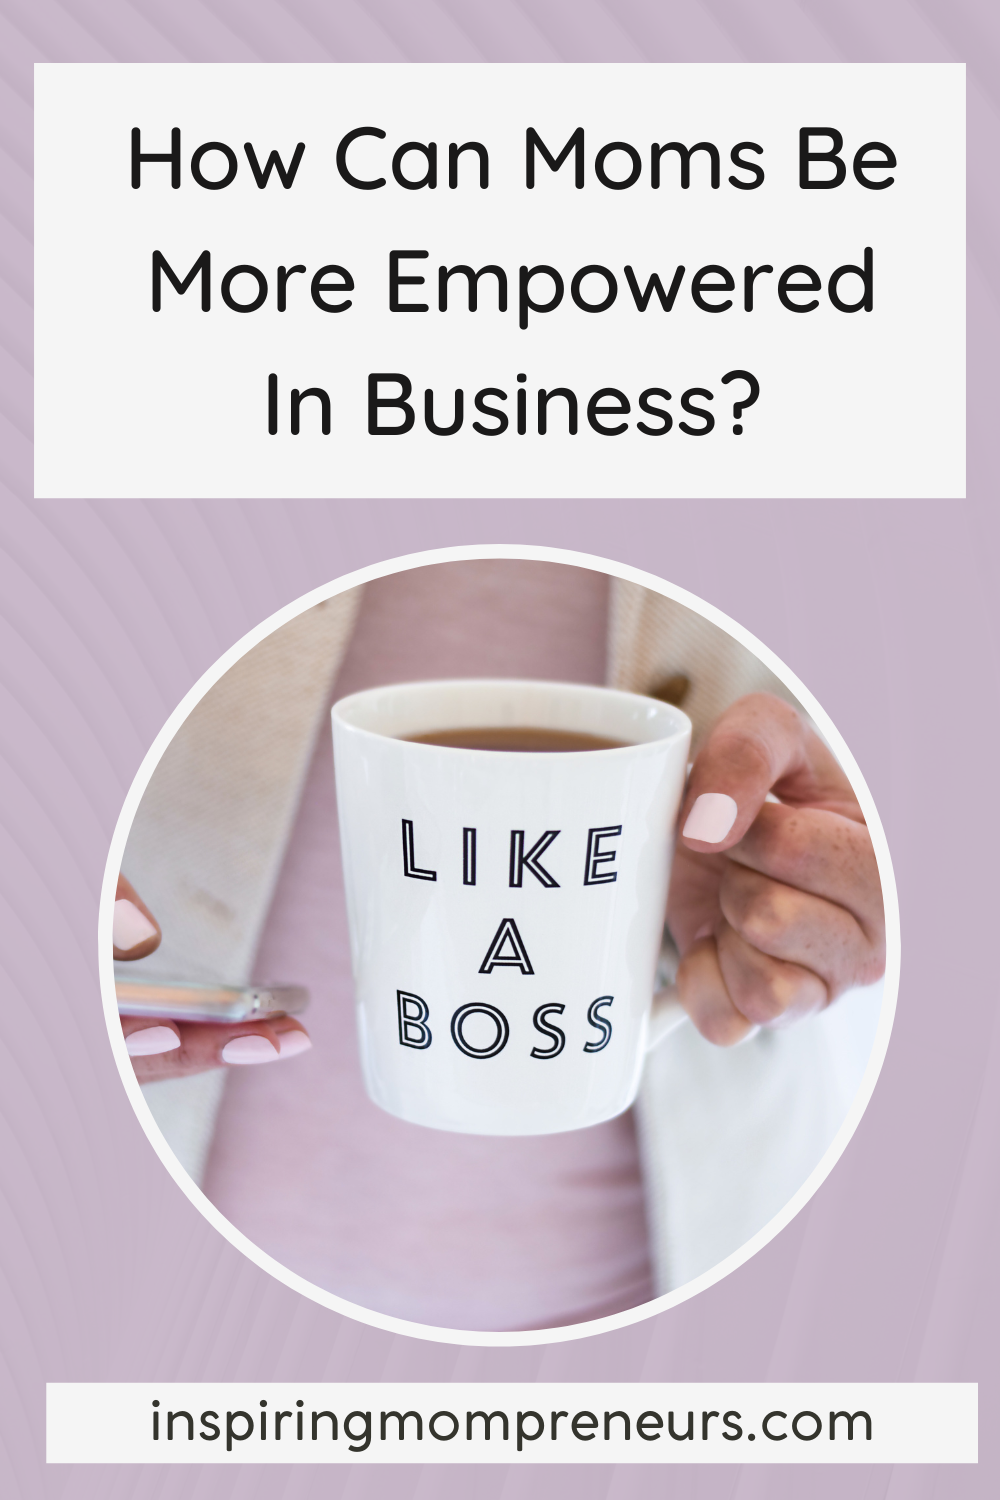 Mom Entrepreneurs face a daily battle no-one else sees, between housework, childminding and work-work. So, how can Moms be more empowered in business?